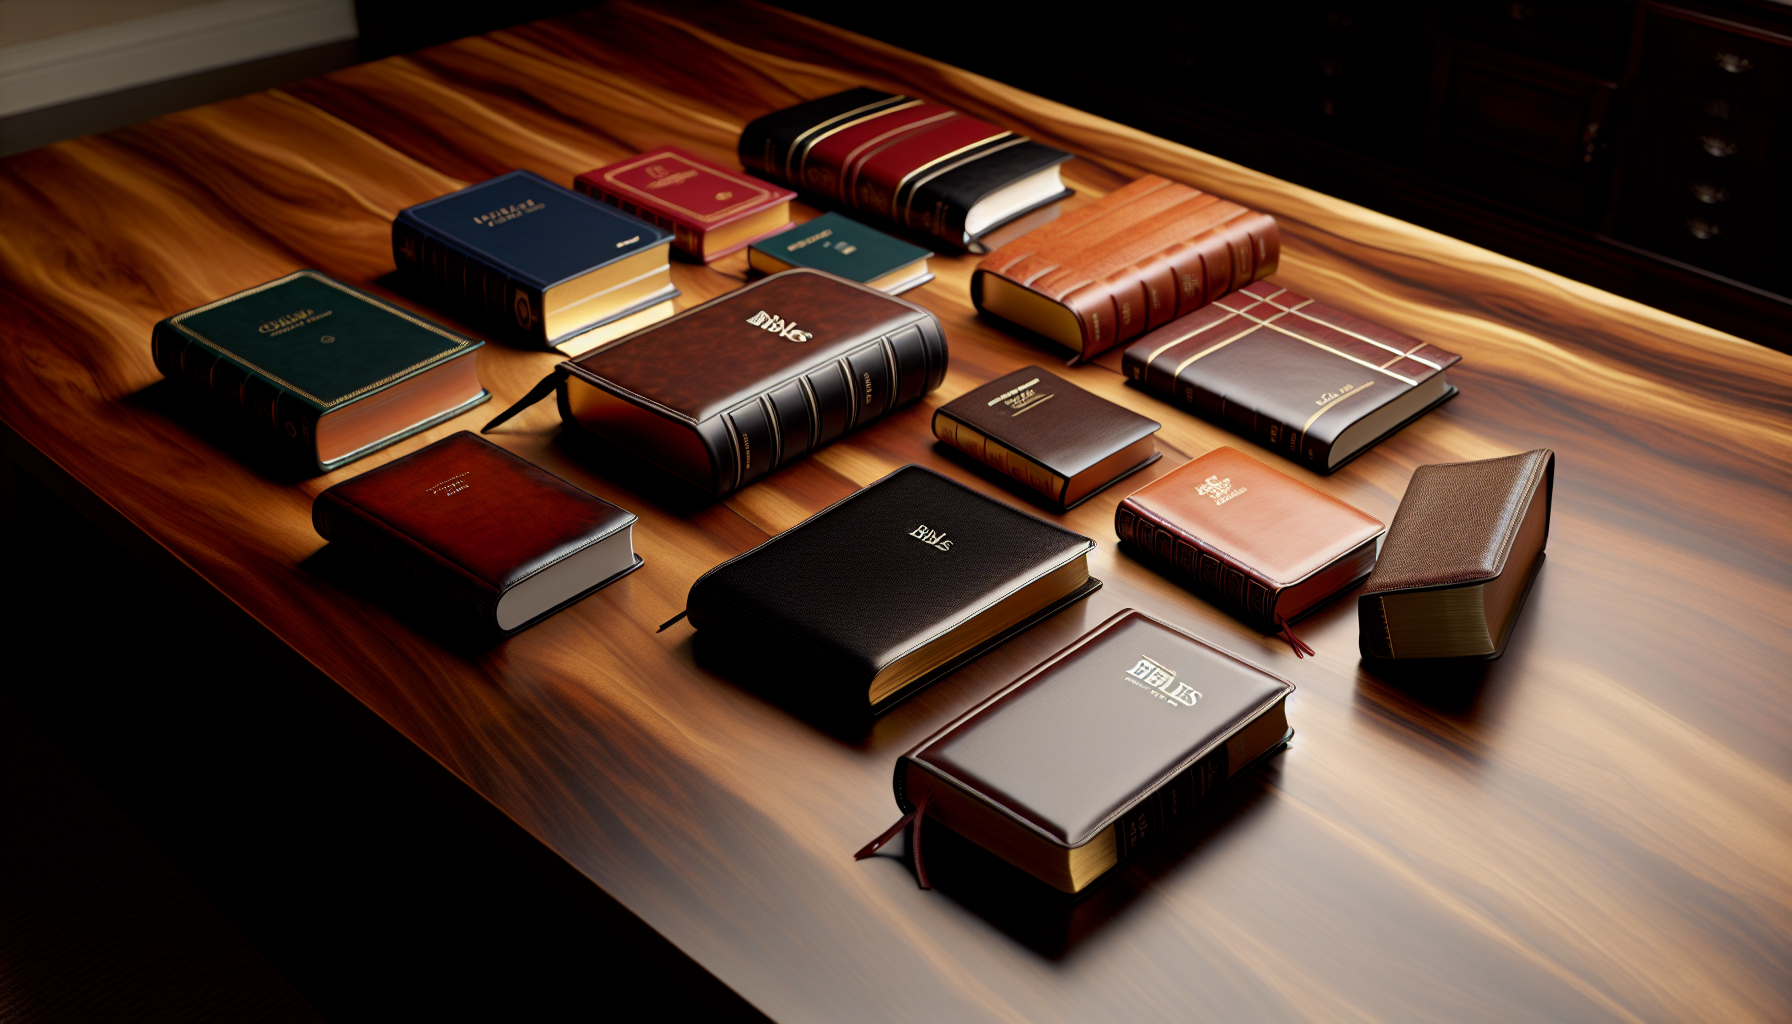 A collection of premium Bibles